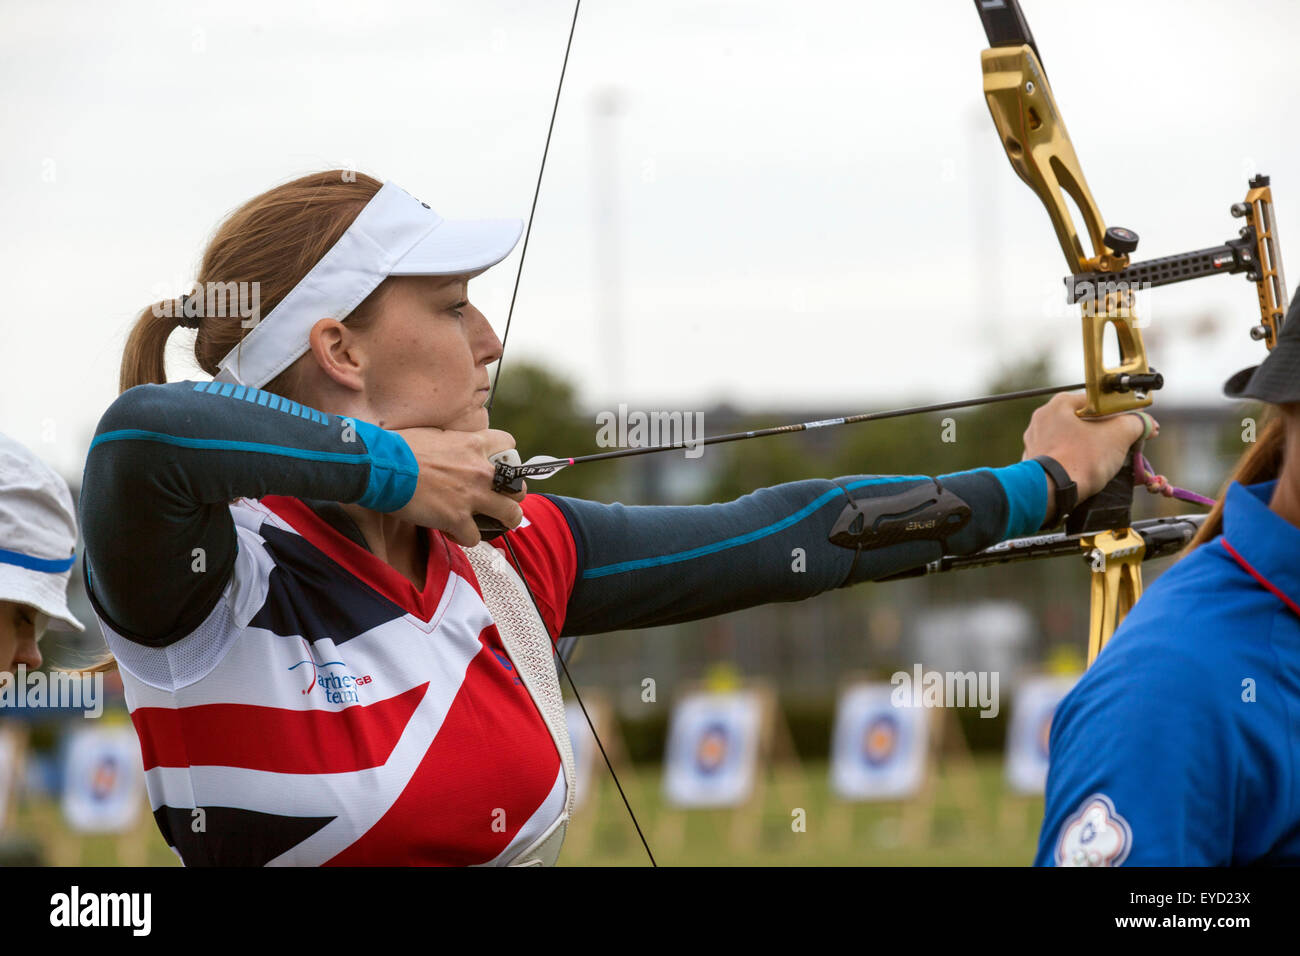 Copenhagen, Denmark, July 27th, 2015. British archer Nicky Hunt takes aim for her shoot in the qualifying round in recurve bow at the World Archery Championships in Copenhagen Stock Photo